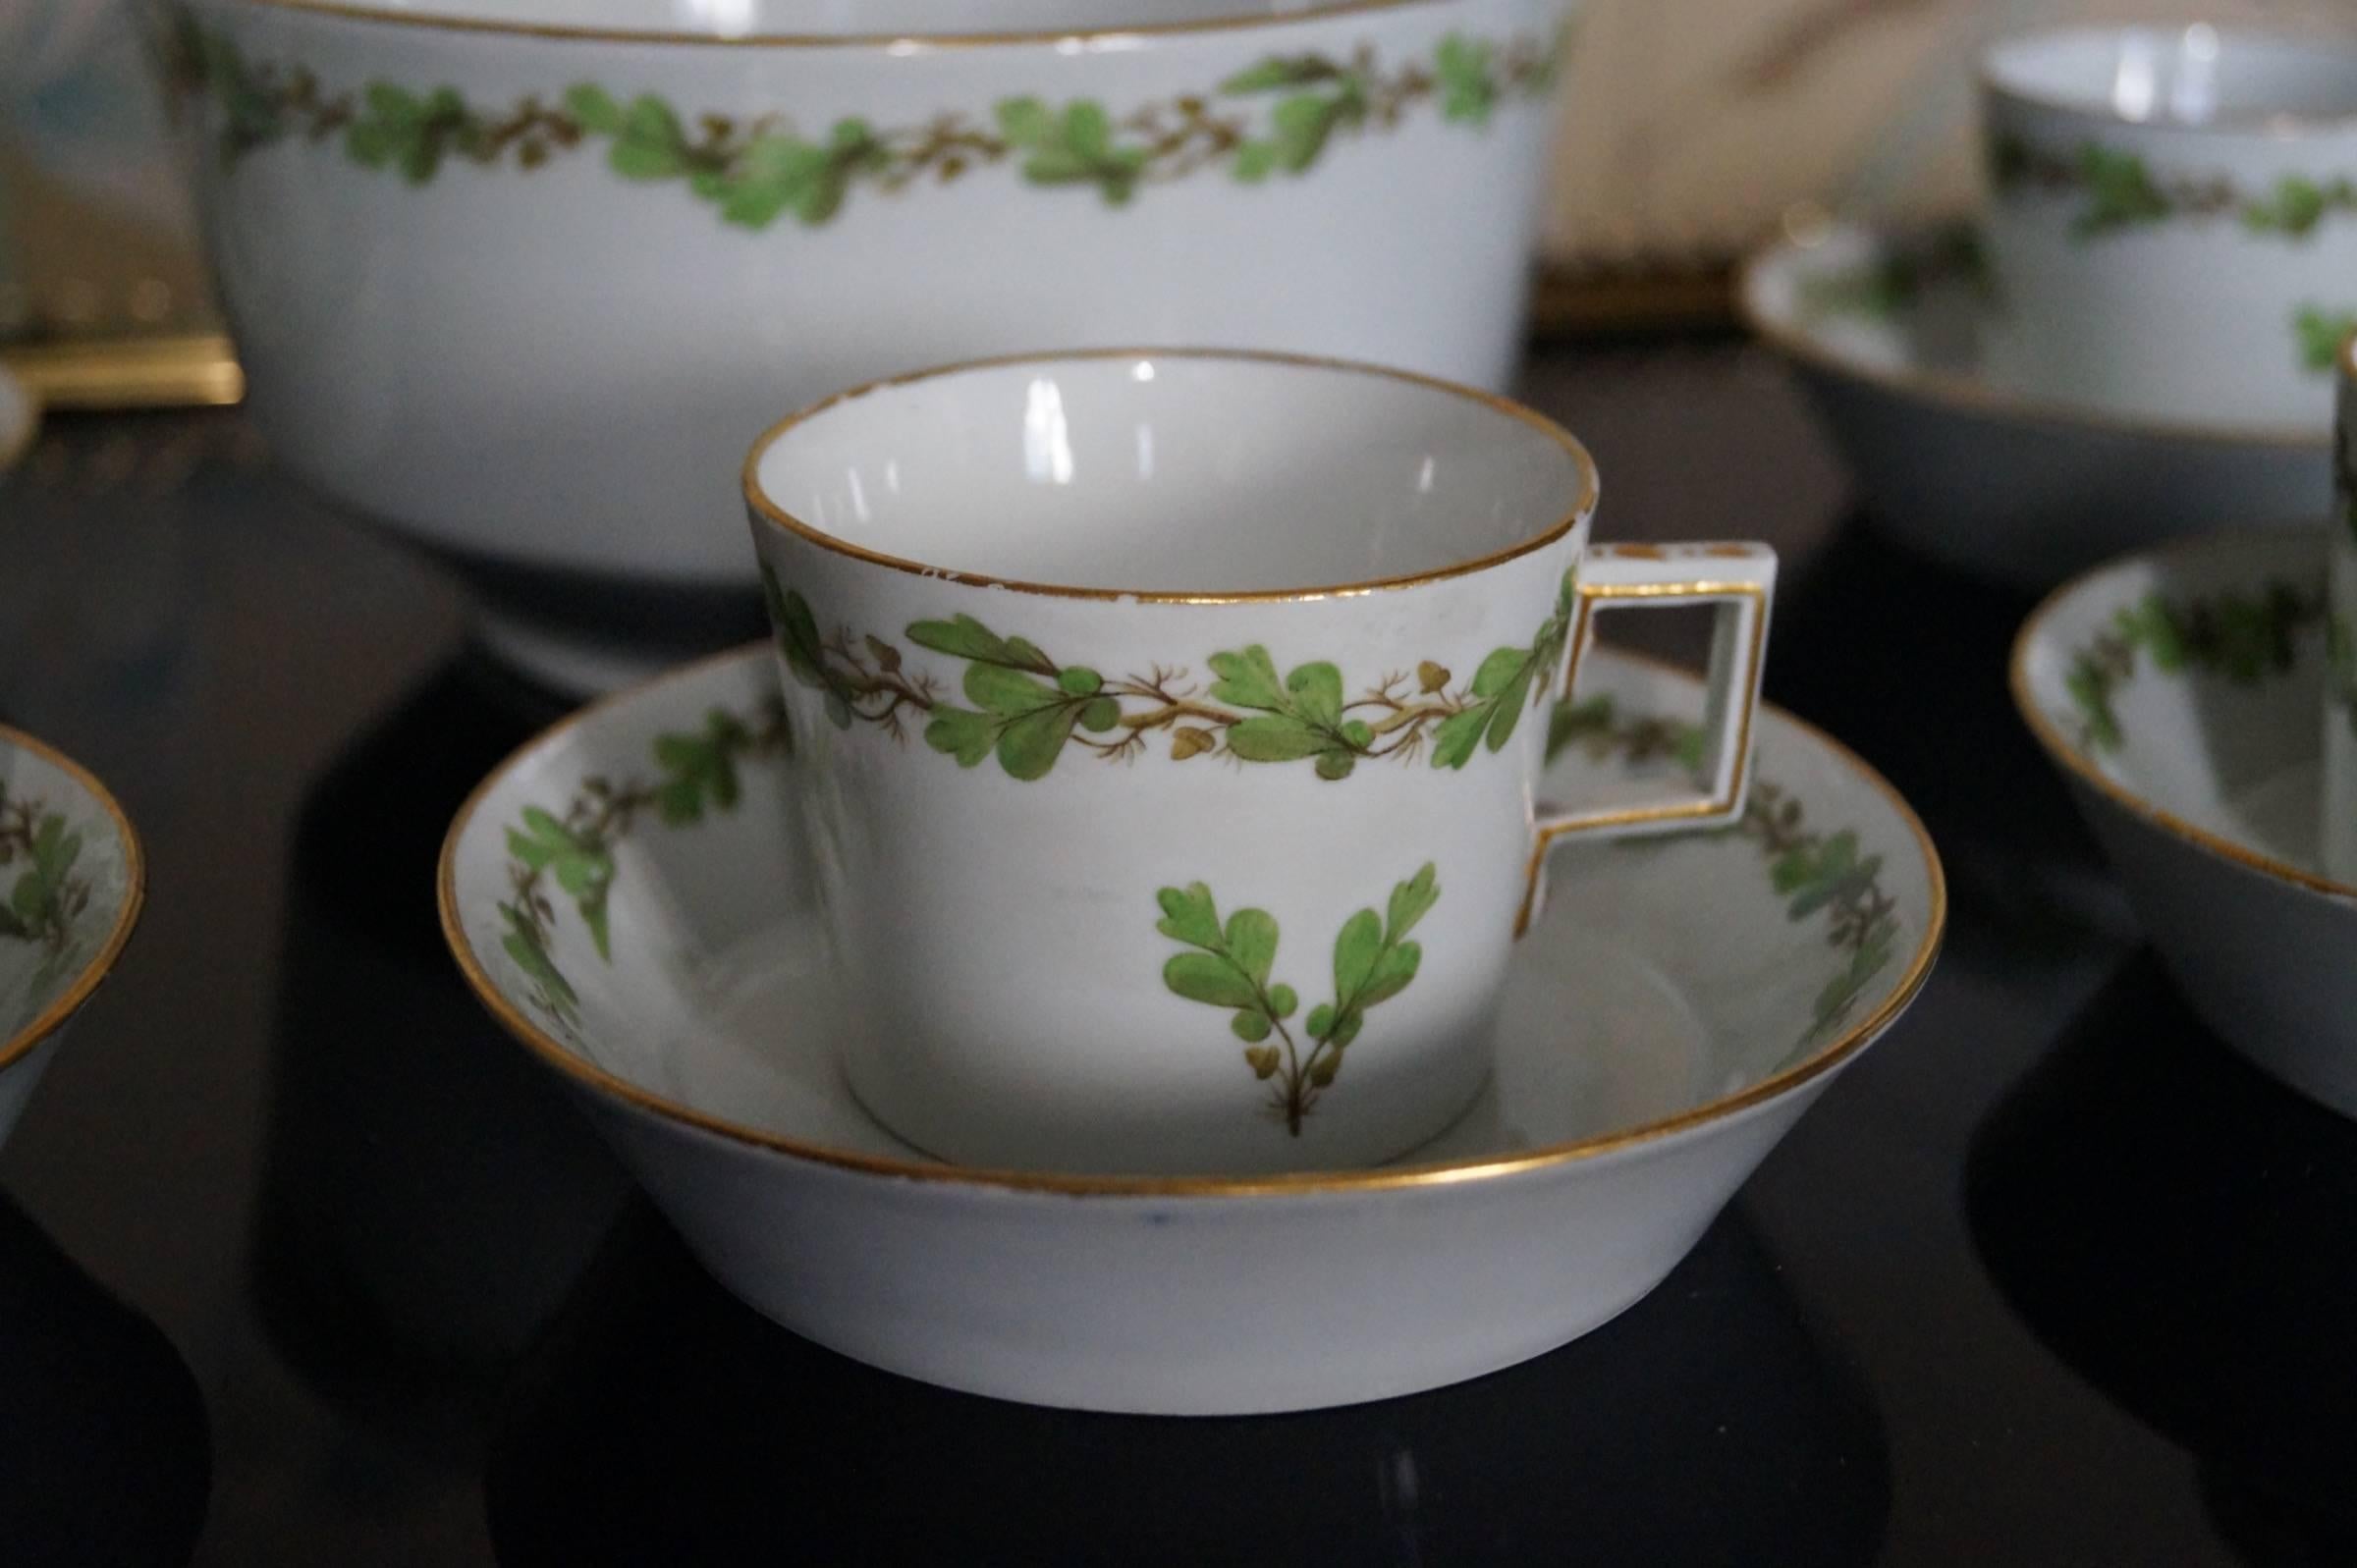 18th century cups and saucers